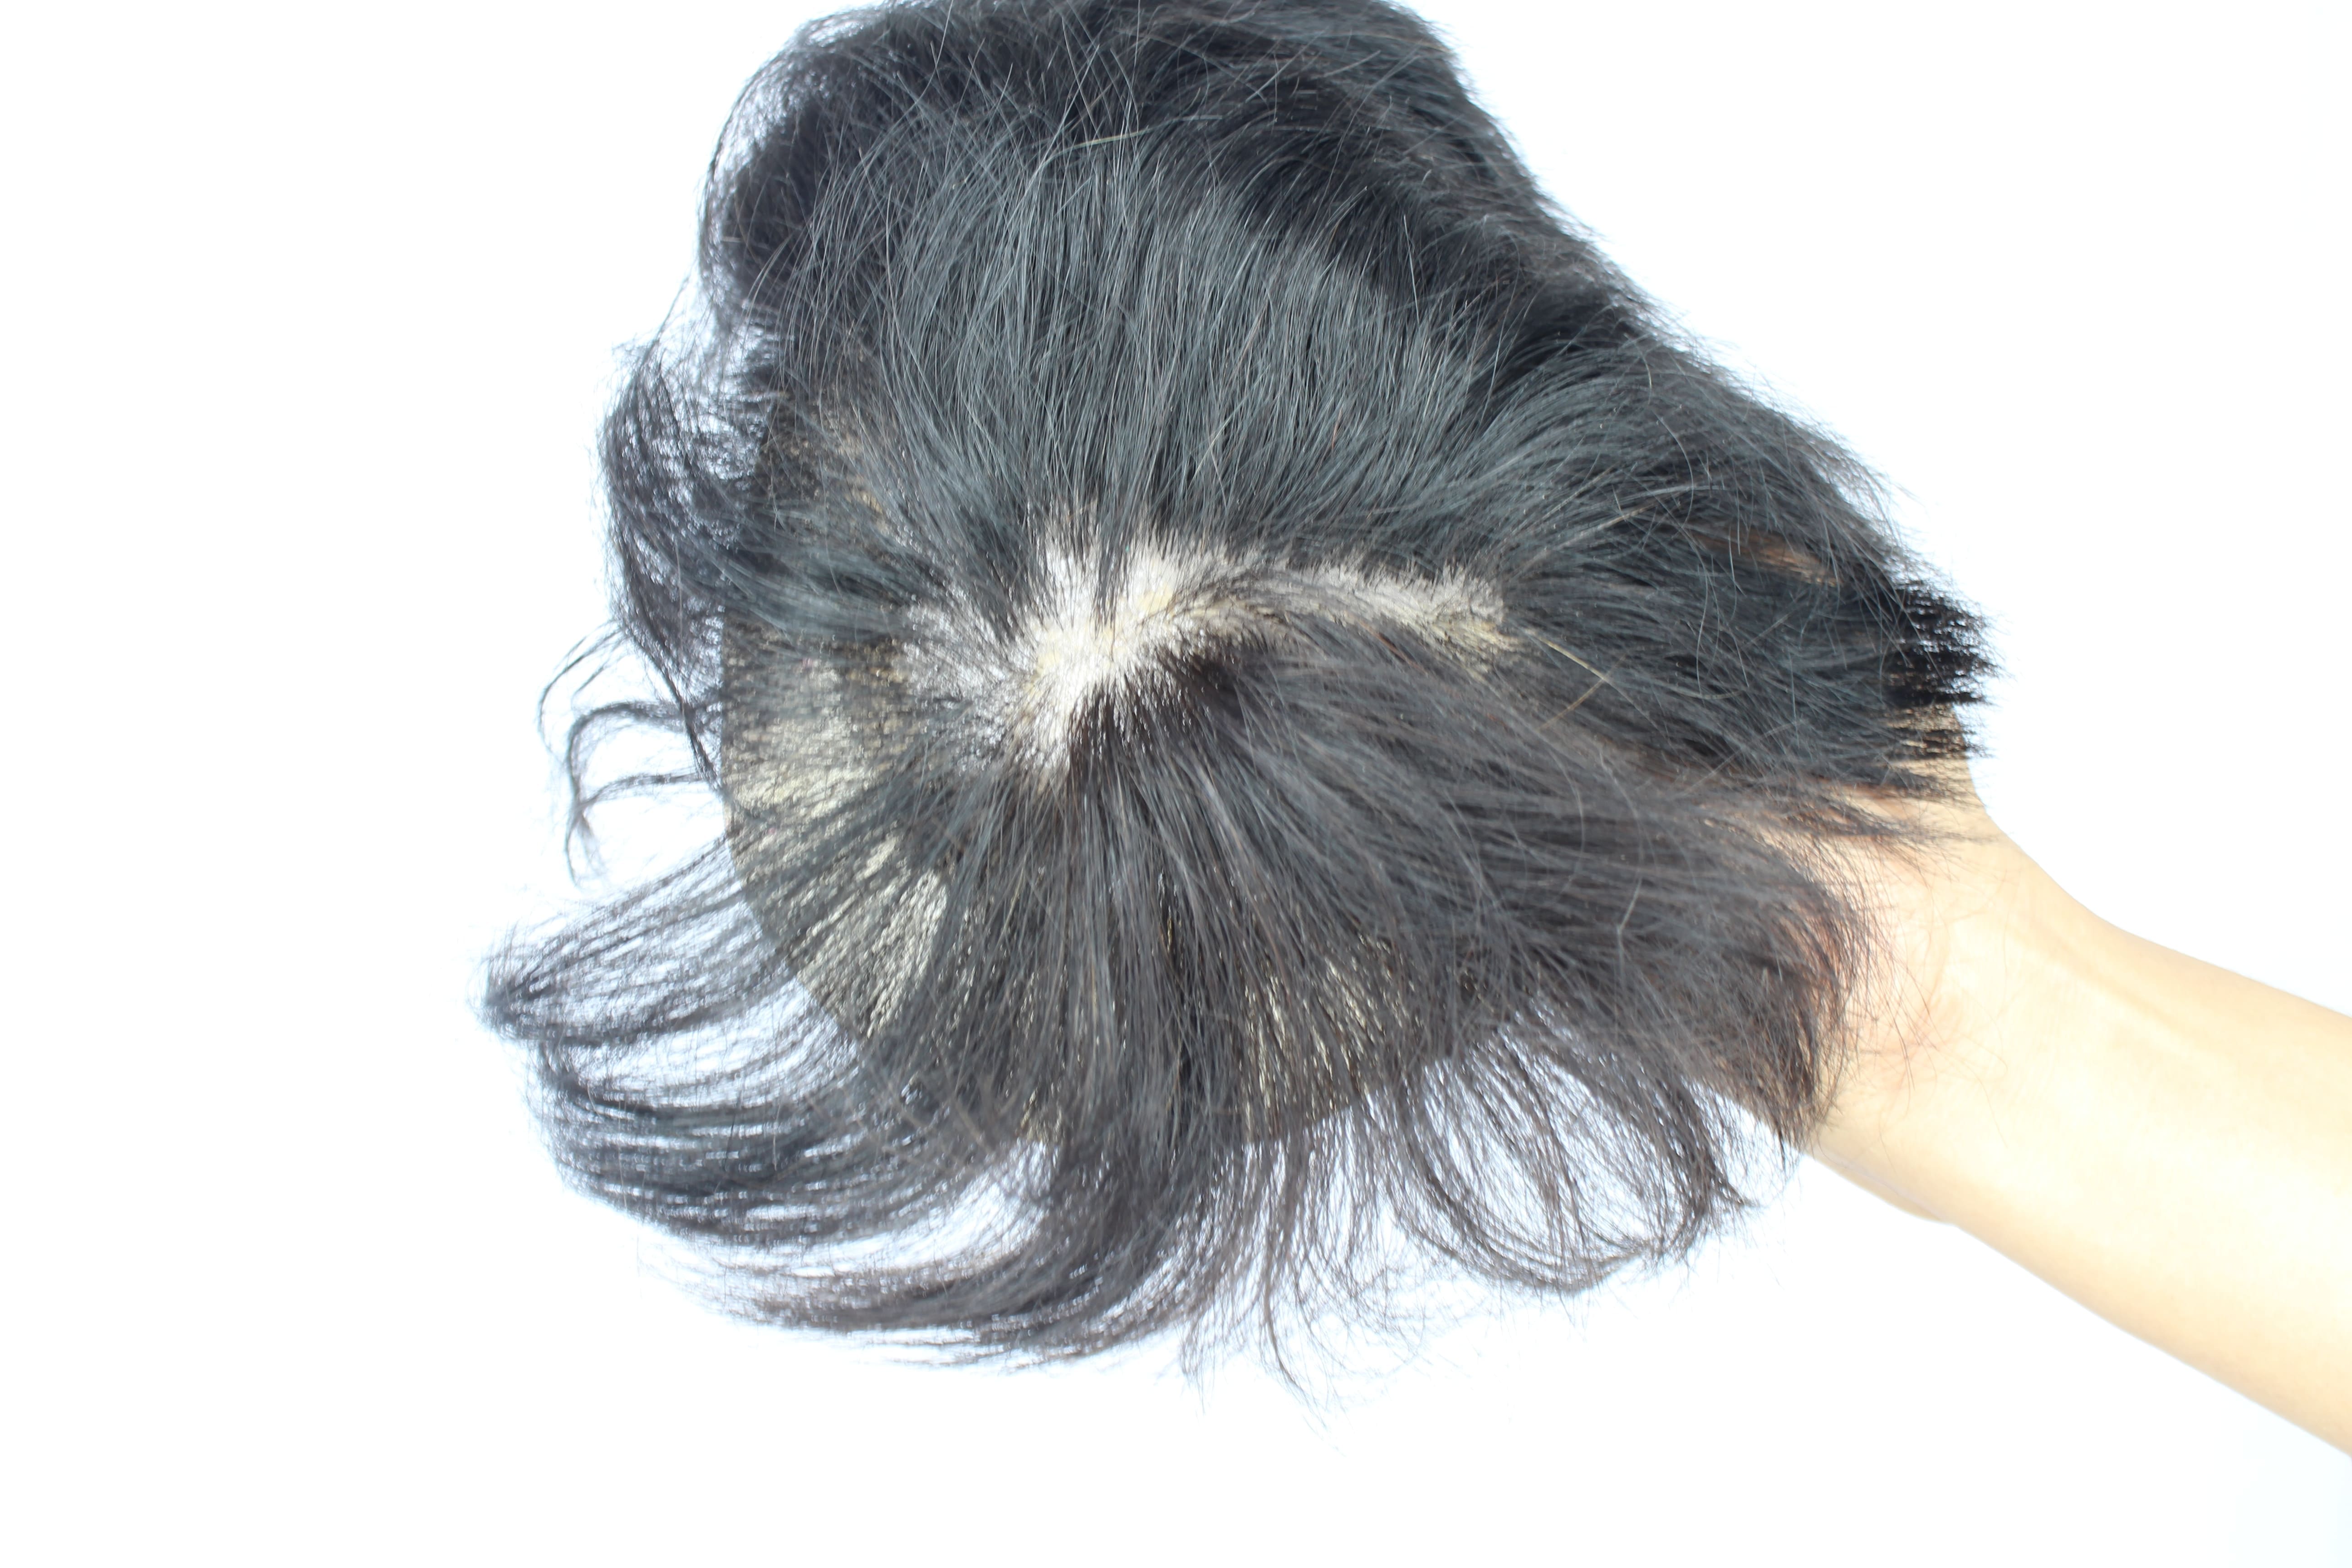 Hair Patch Filling Service In Delhi NCR - Patch Professor